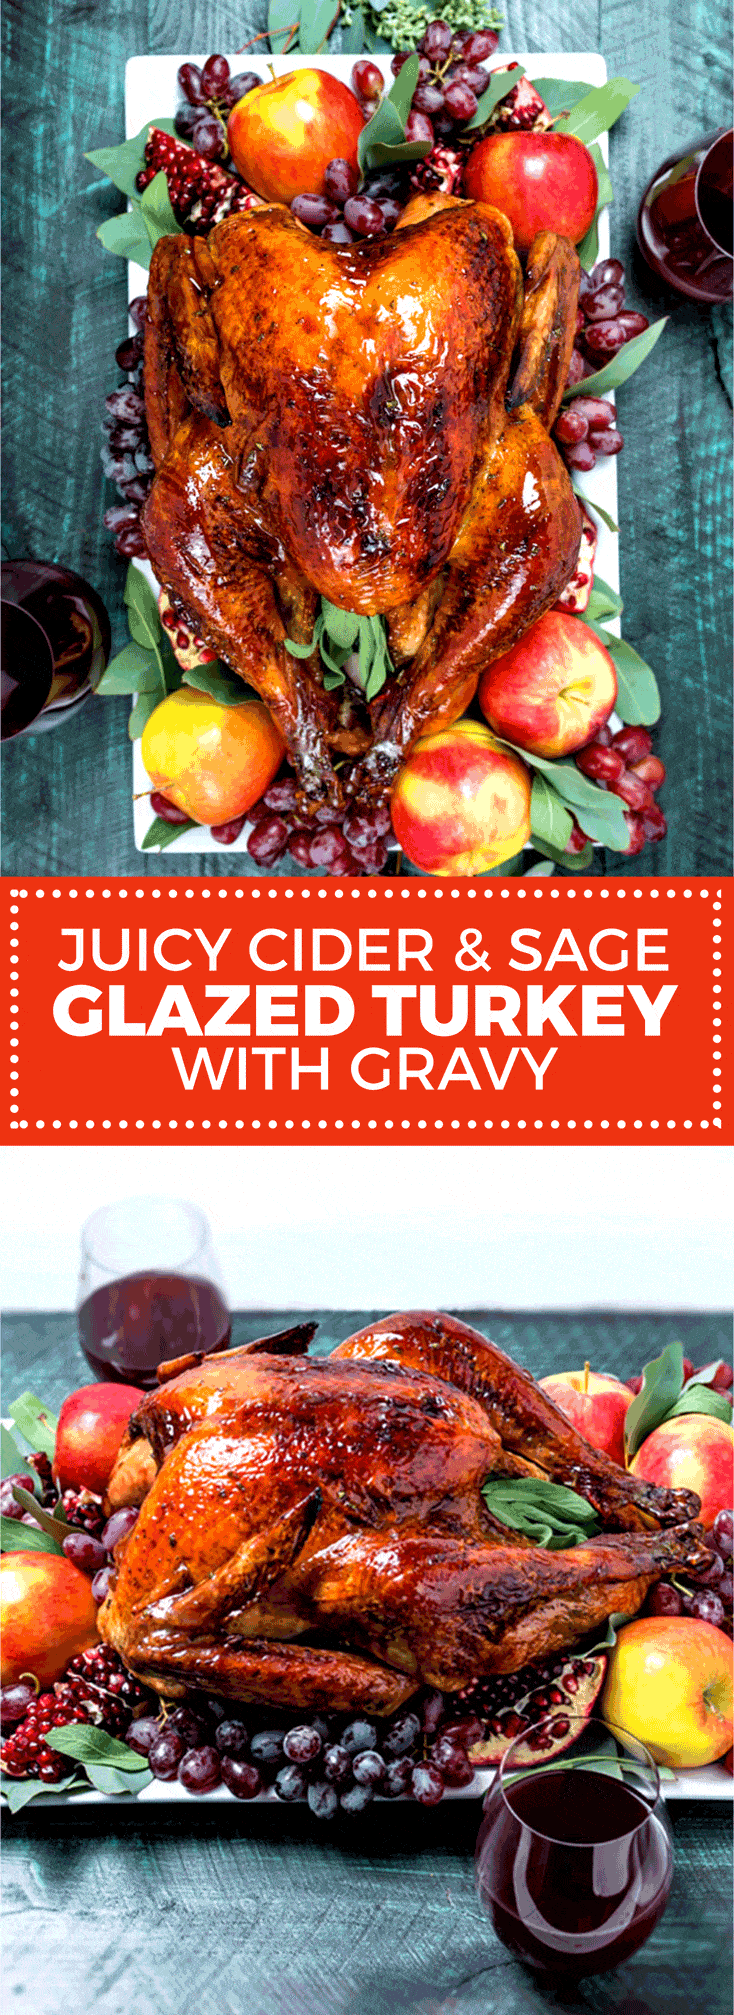 Juicy Cider and Sage Glazed Turkey with Gravy. Dry-brined and brushed with a buttery apple cider mixture, this turkey has crisp browned skin and moist, delicious meat | hostthetoast.com